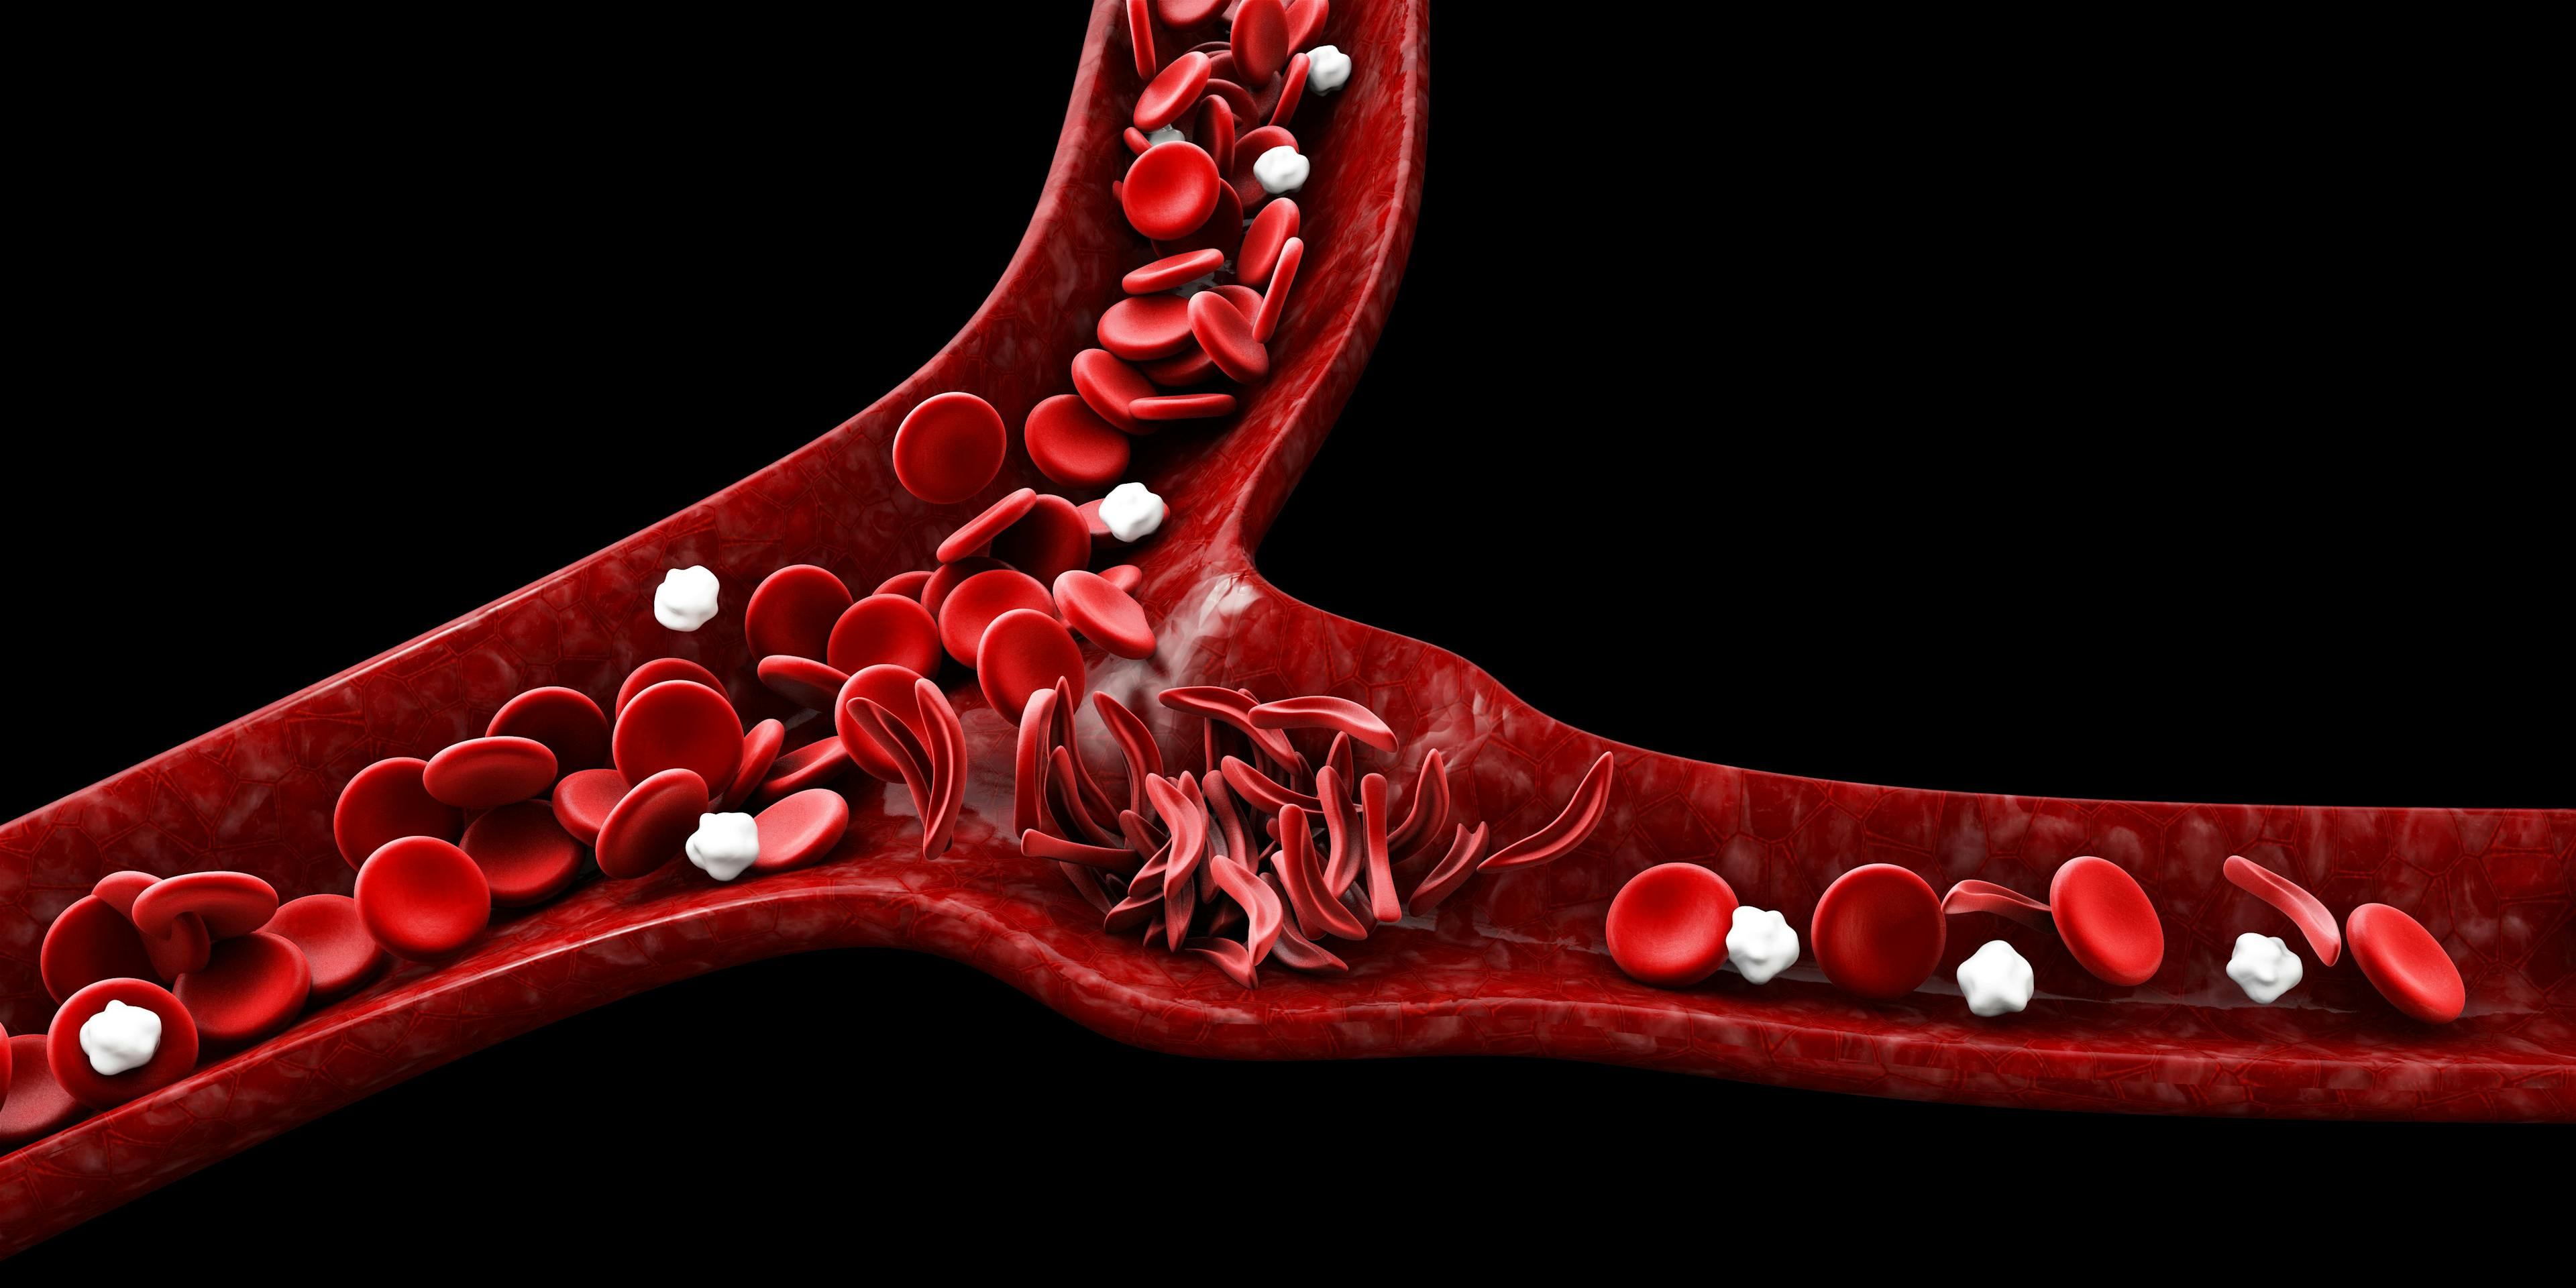 Improved sickle cell disease in children associated with hydroxyurea treatment | Image Credit: © tussik - © tussik - stock.adobe.com.